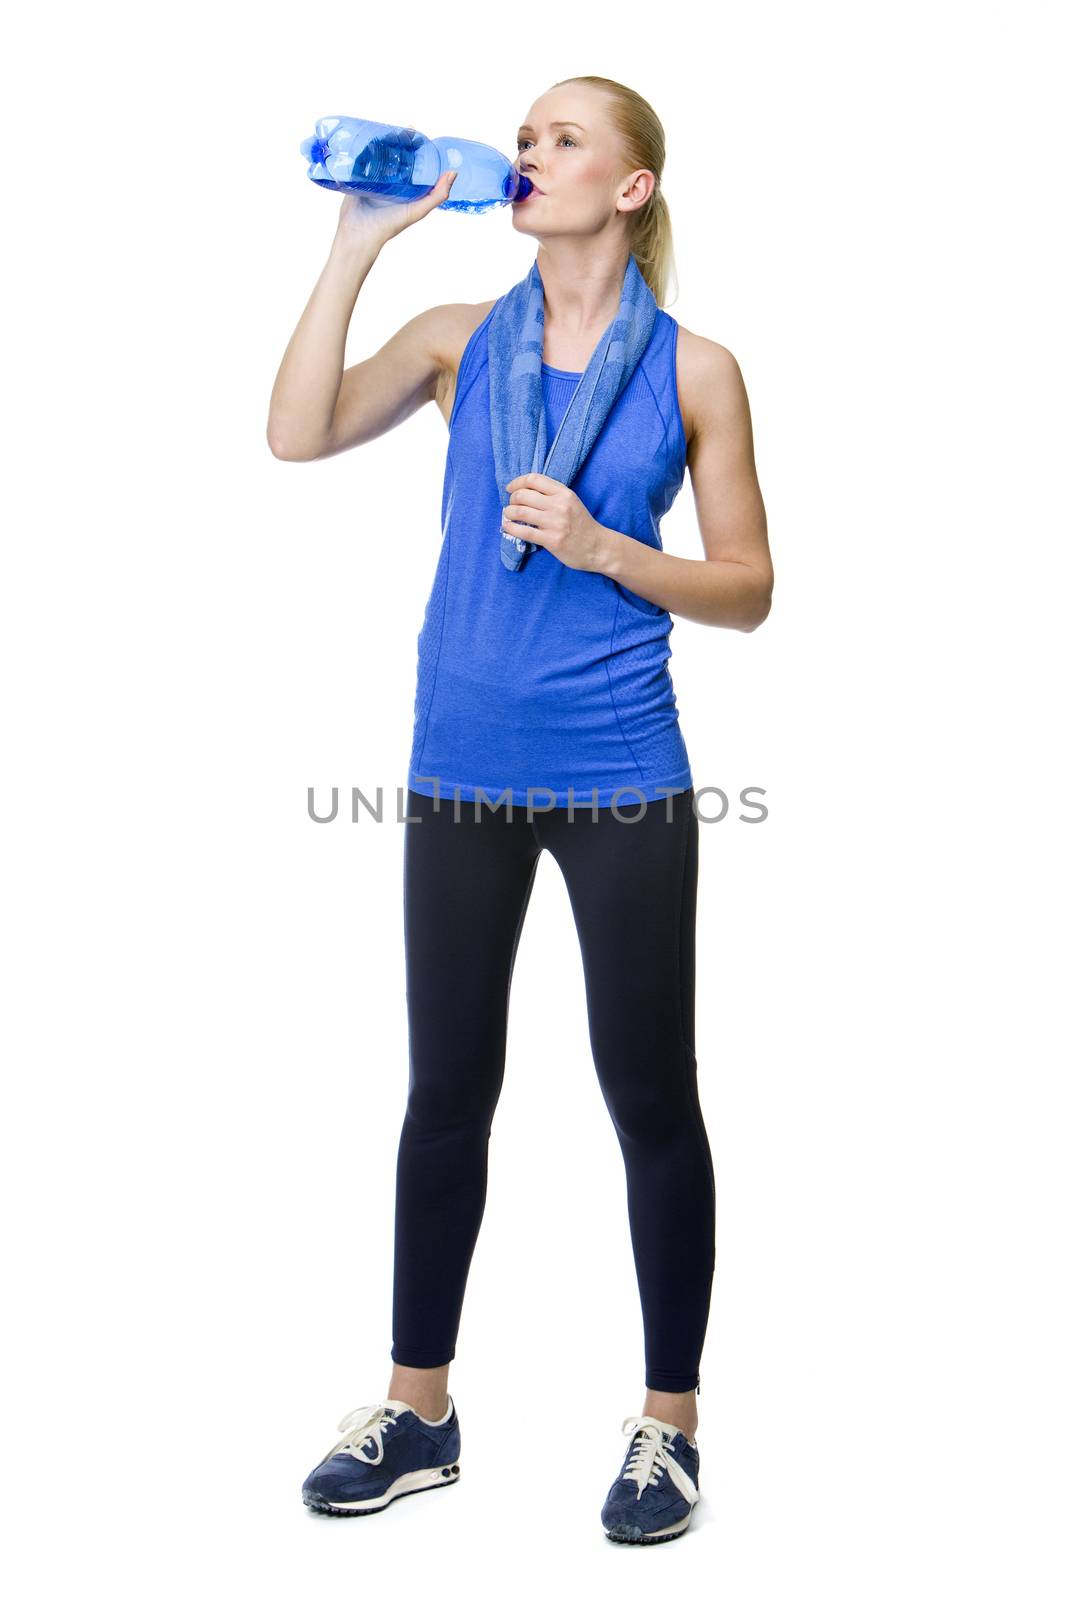 woman in fitness clothing drinking by Flareimage